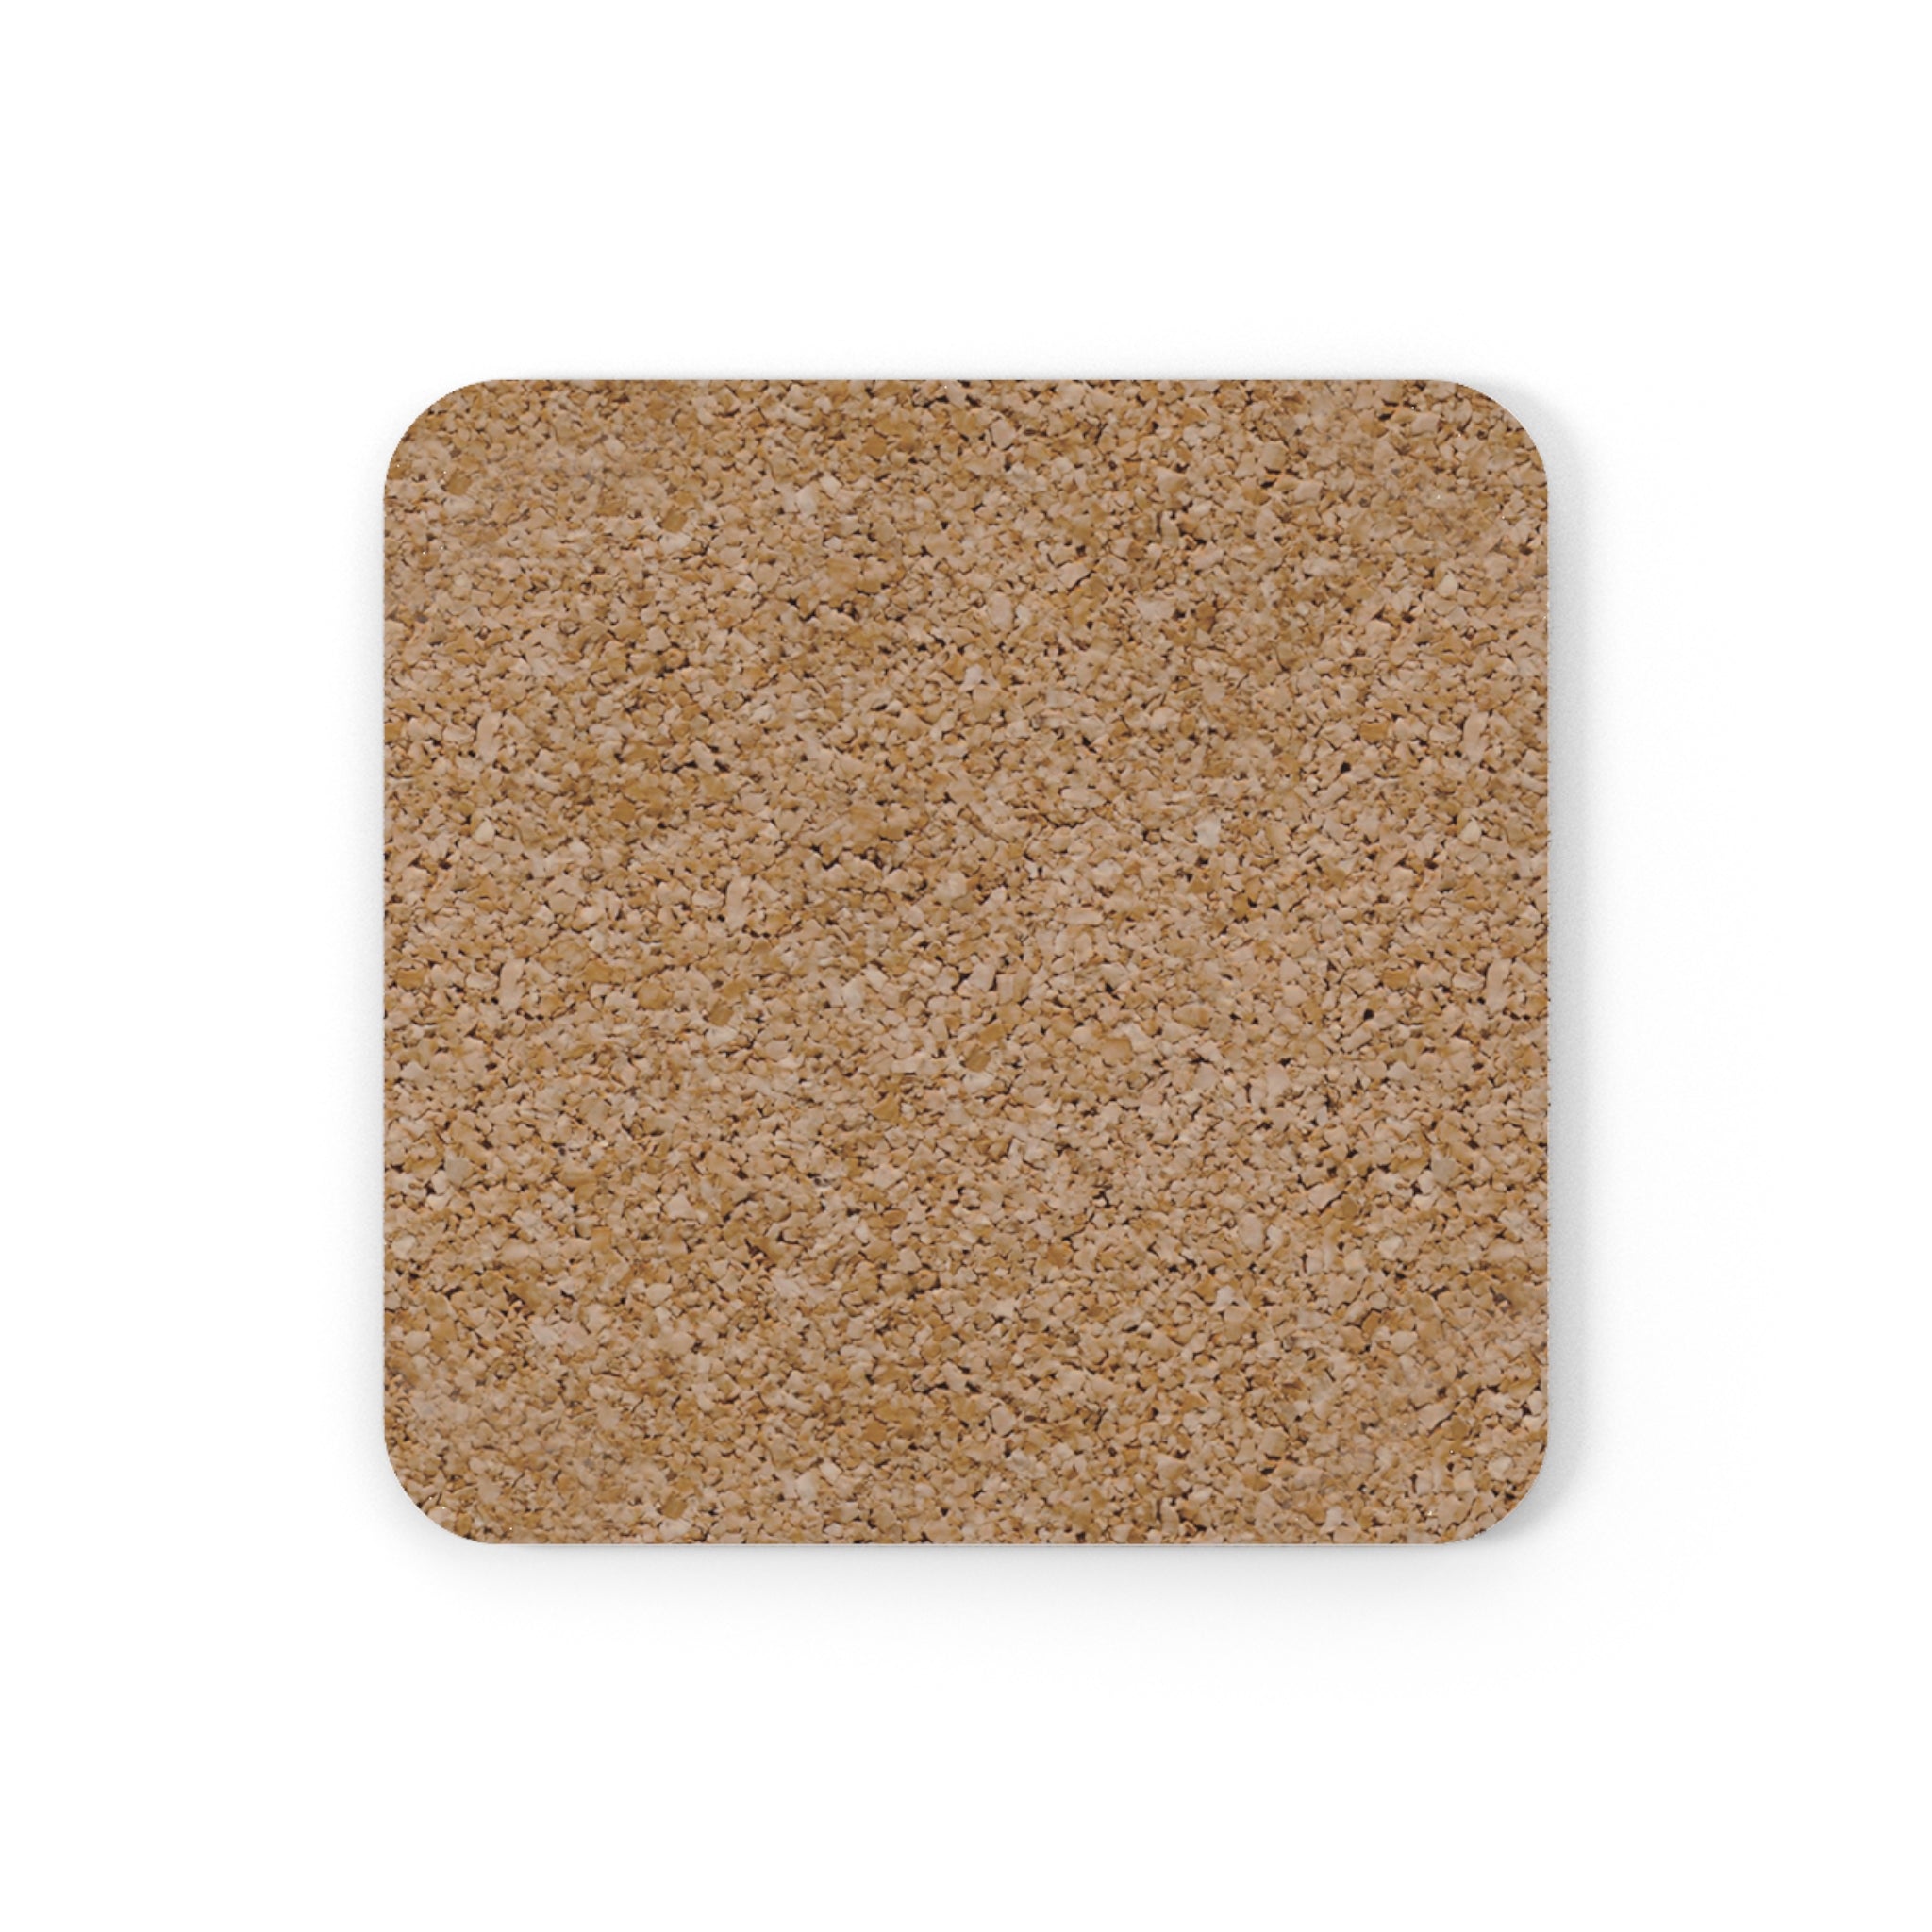 Cameron Creations - Natural Flow - Stylish Coffee Coaster - Square Back